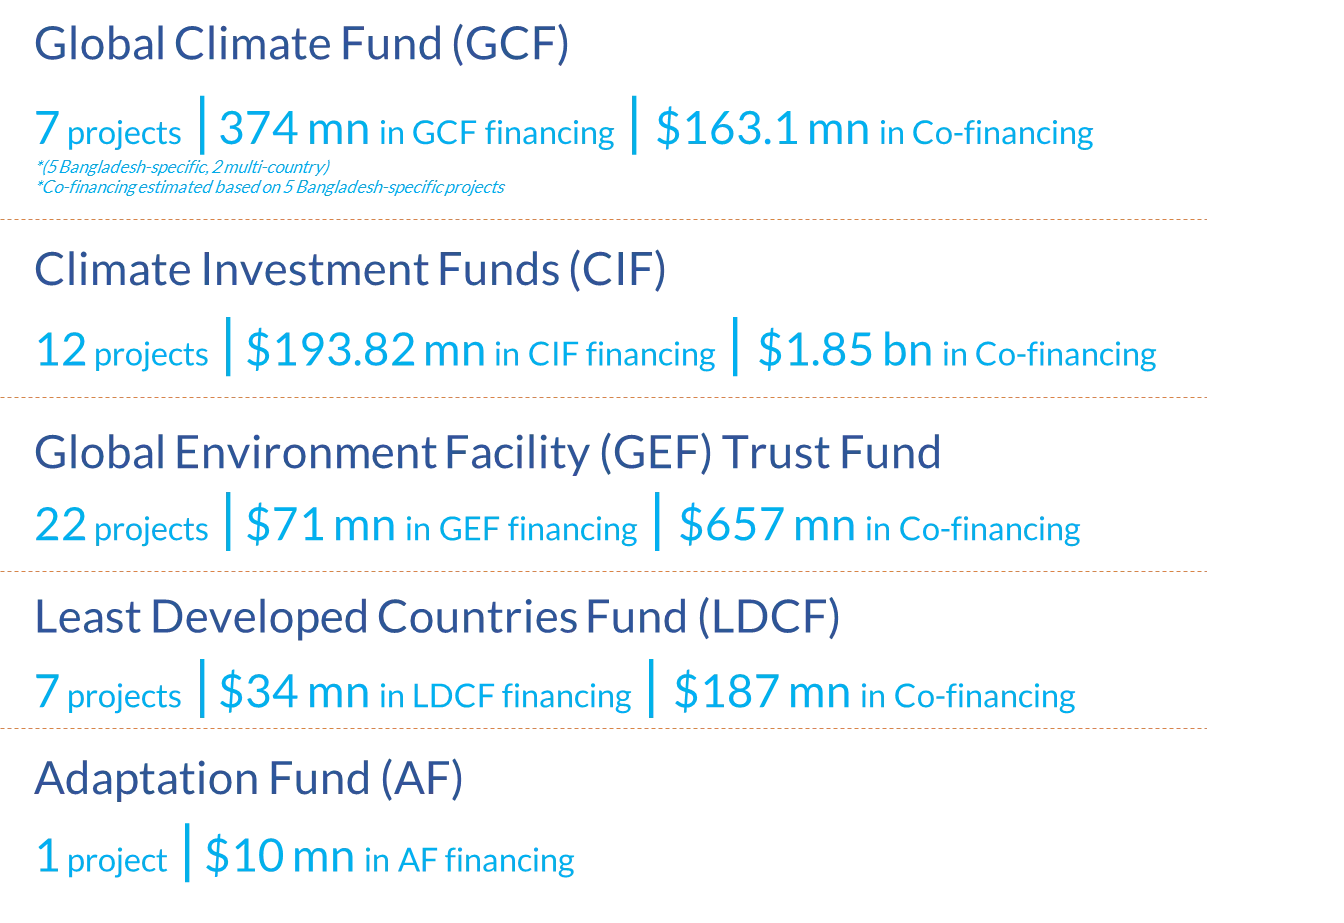 Climate funds received by Bangladesh from different sources